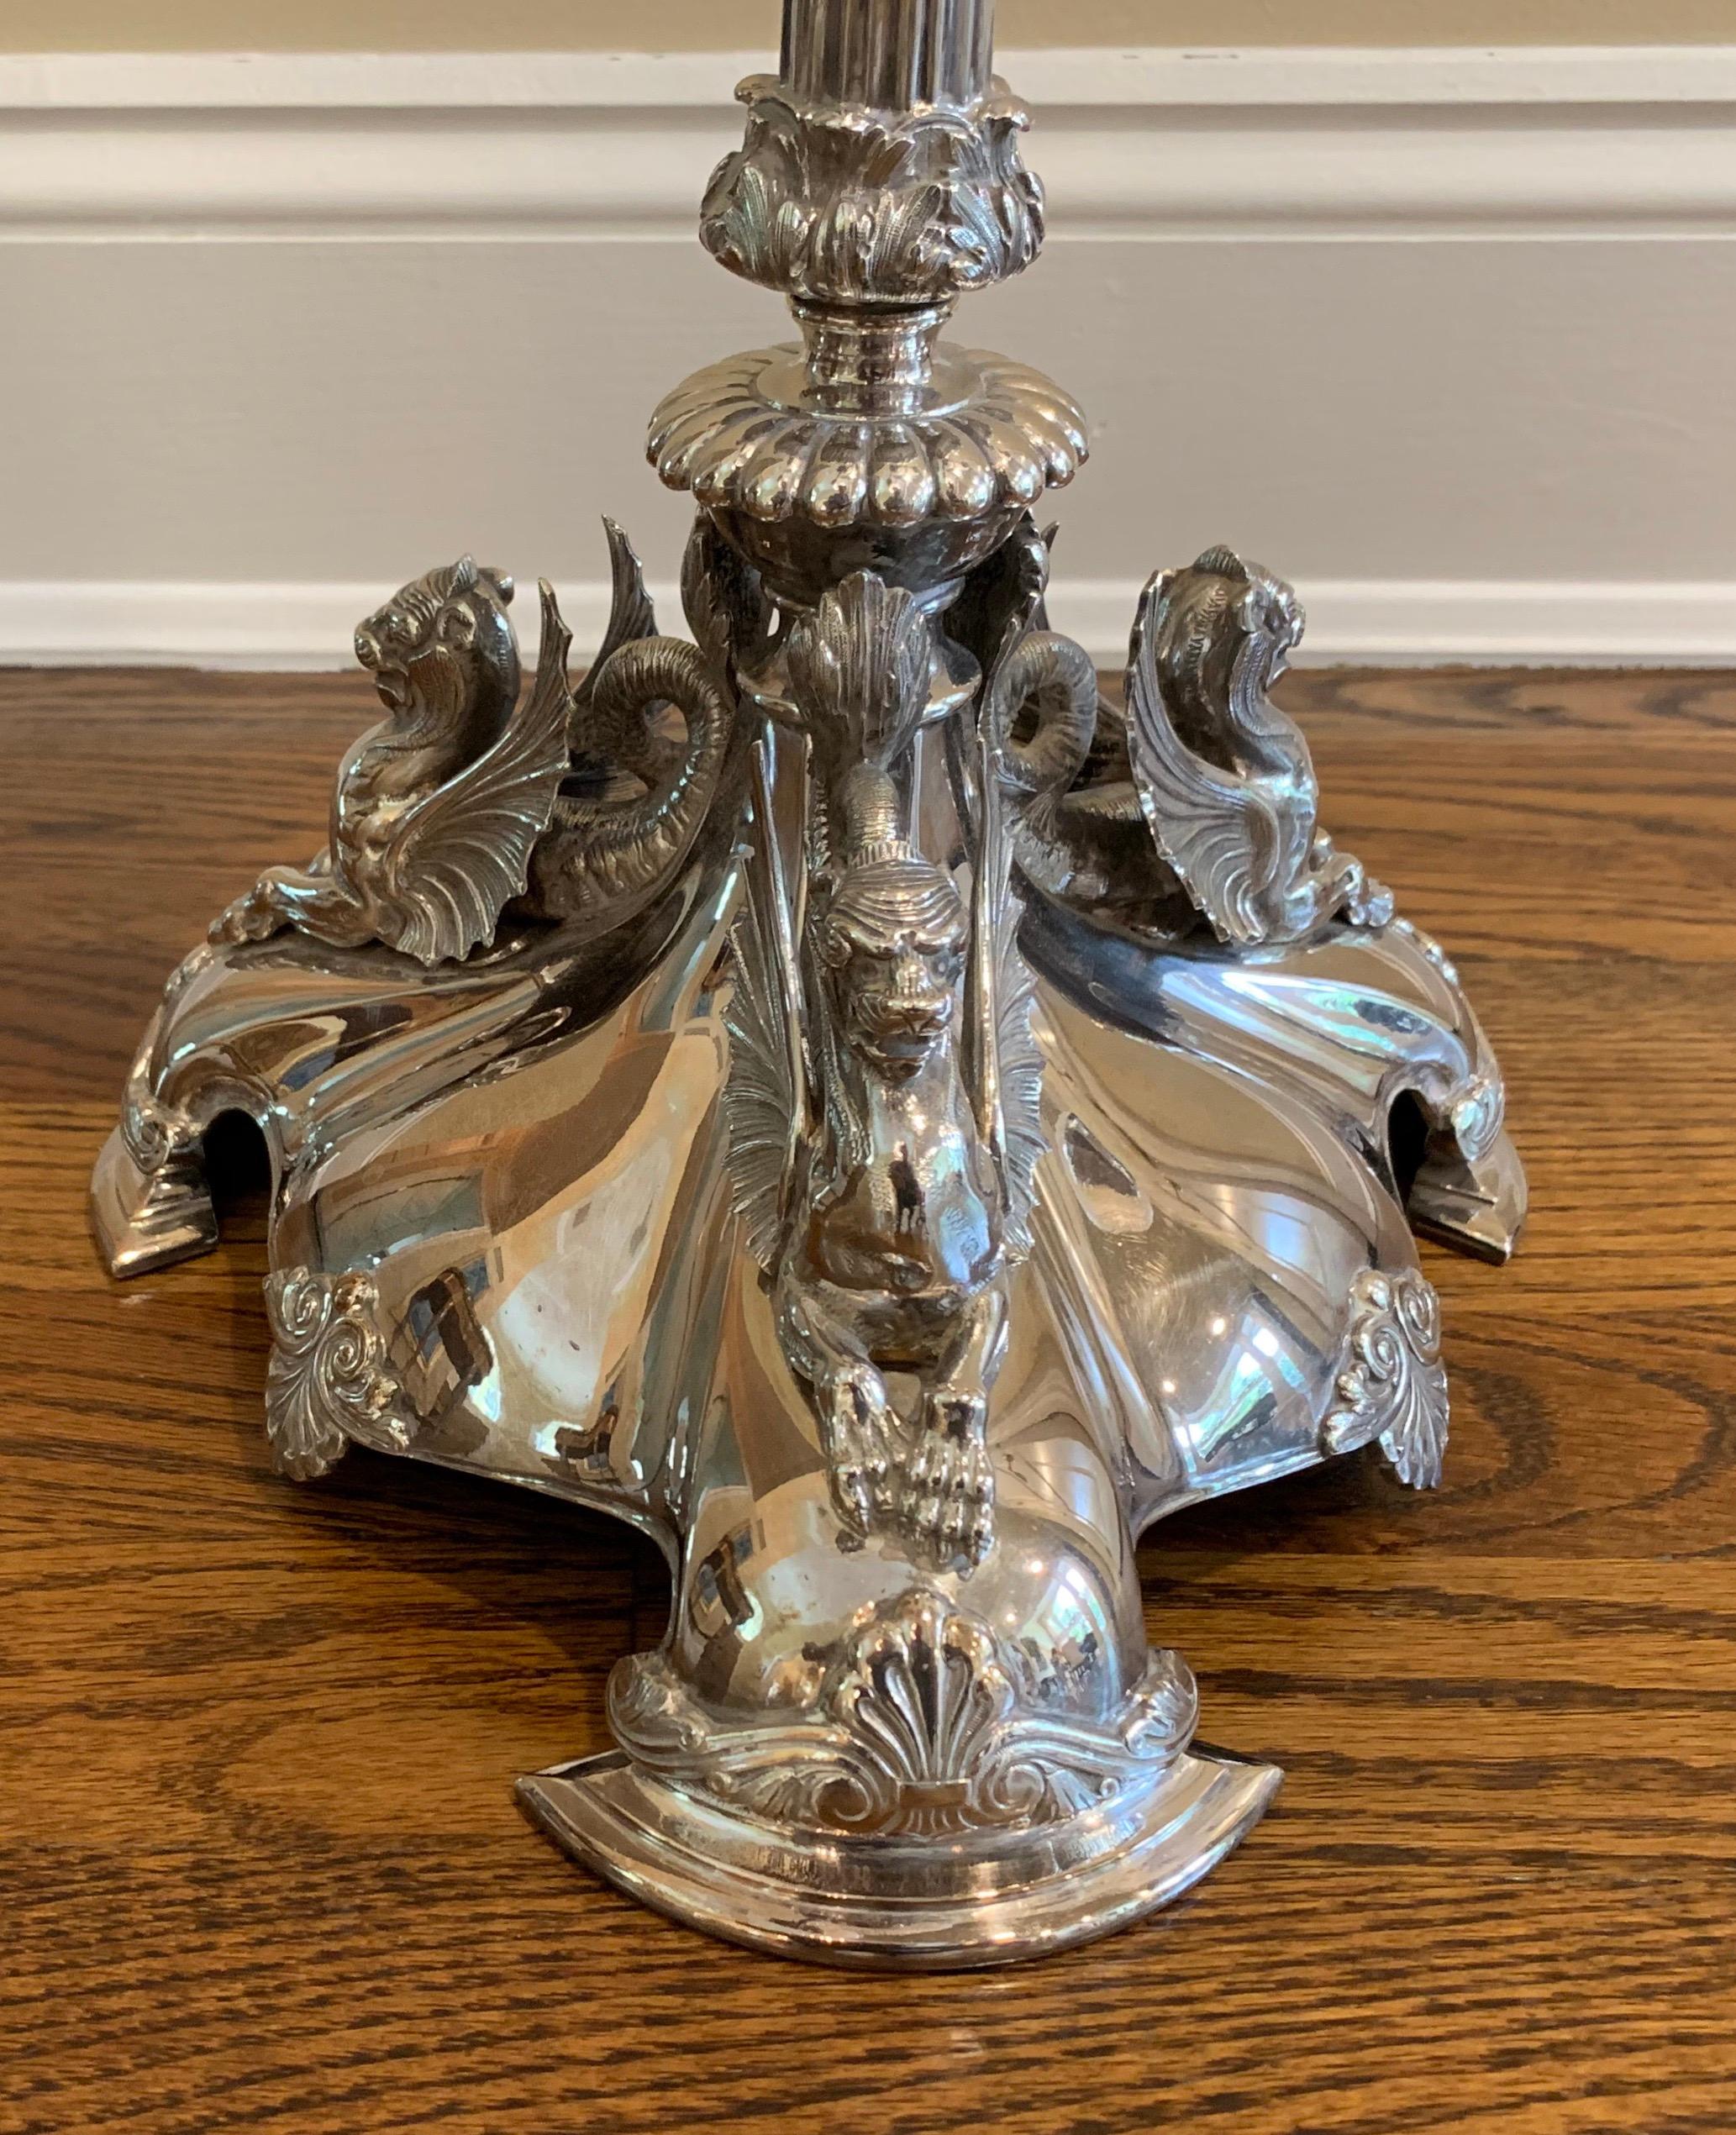 A wonderful Elkington English silver plate lion epergne with 1 large center and 3 smaller side etched glass bowls centerpiece.